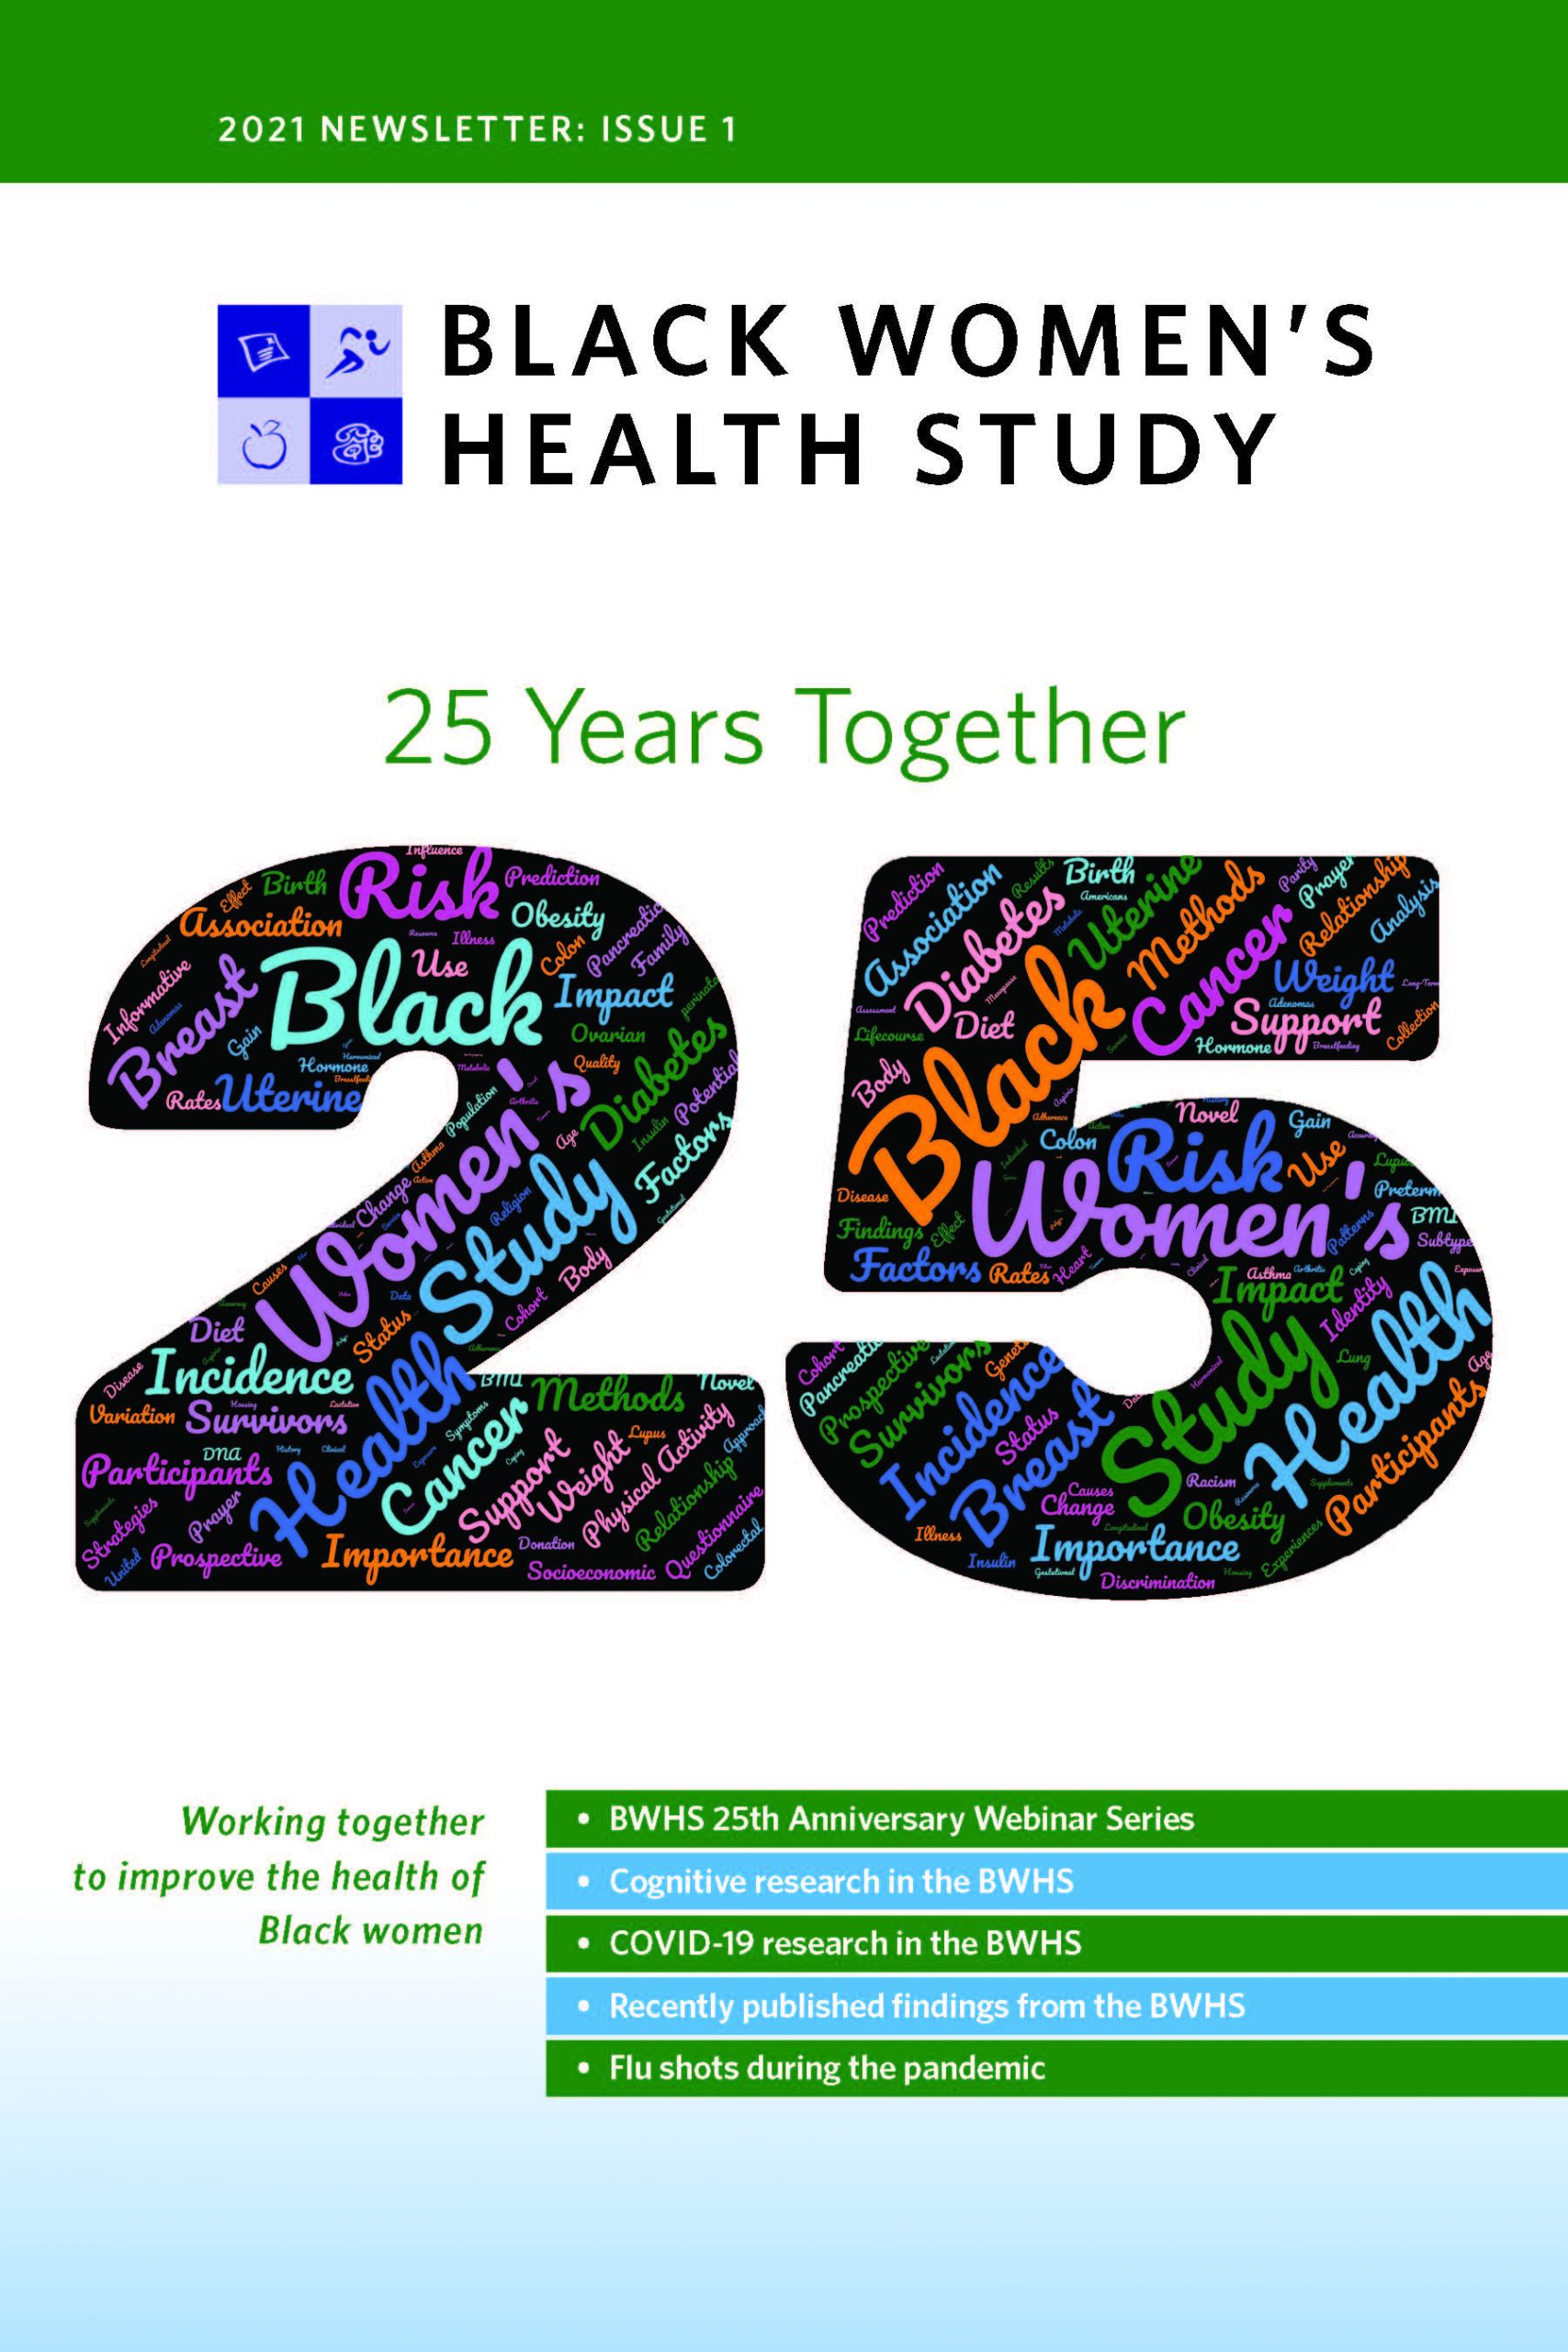 cover-page of Issue 1 of the 2021 newsletter